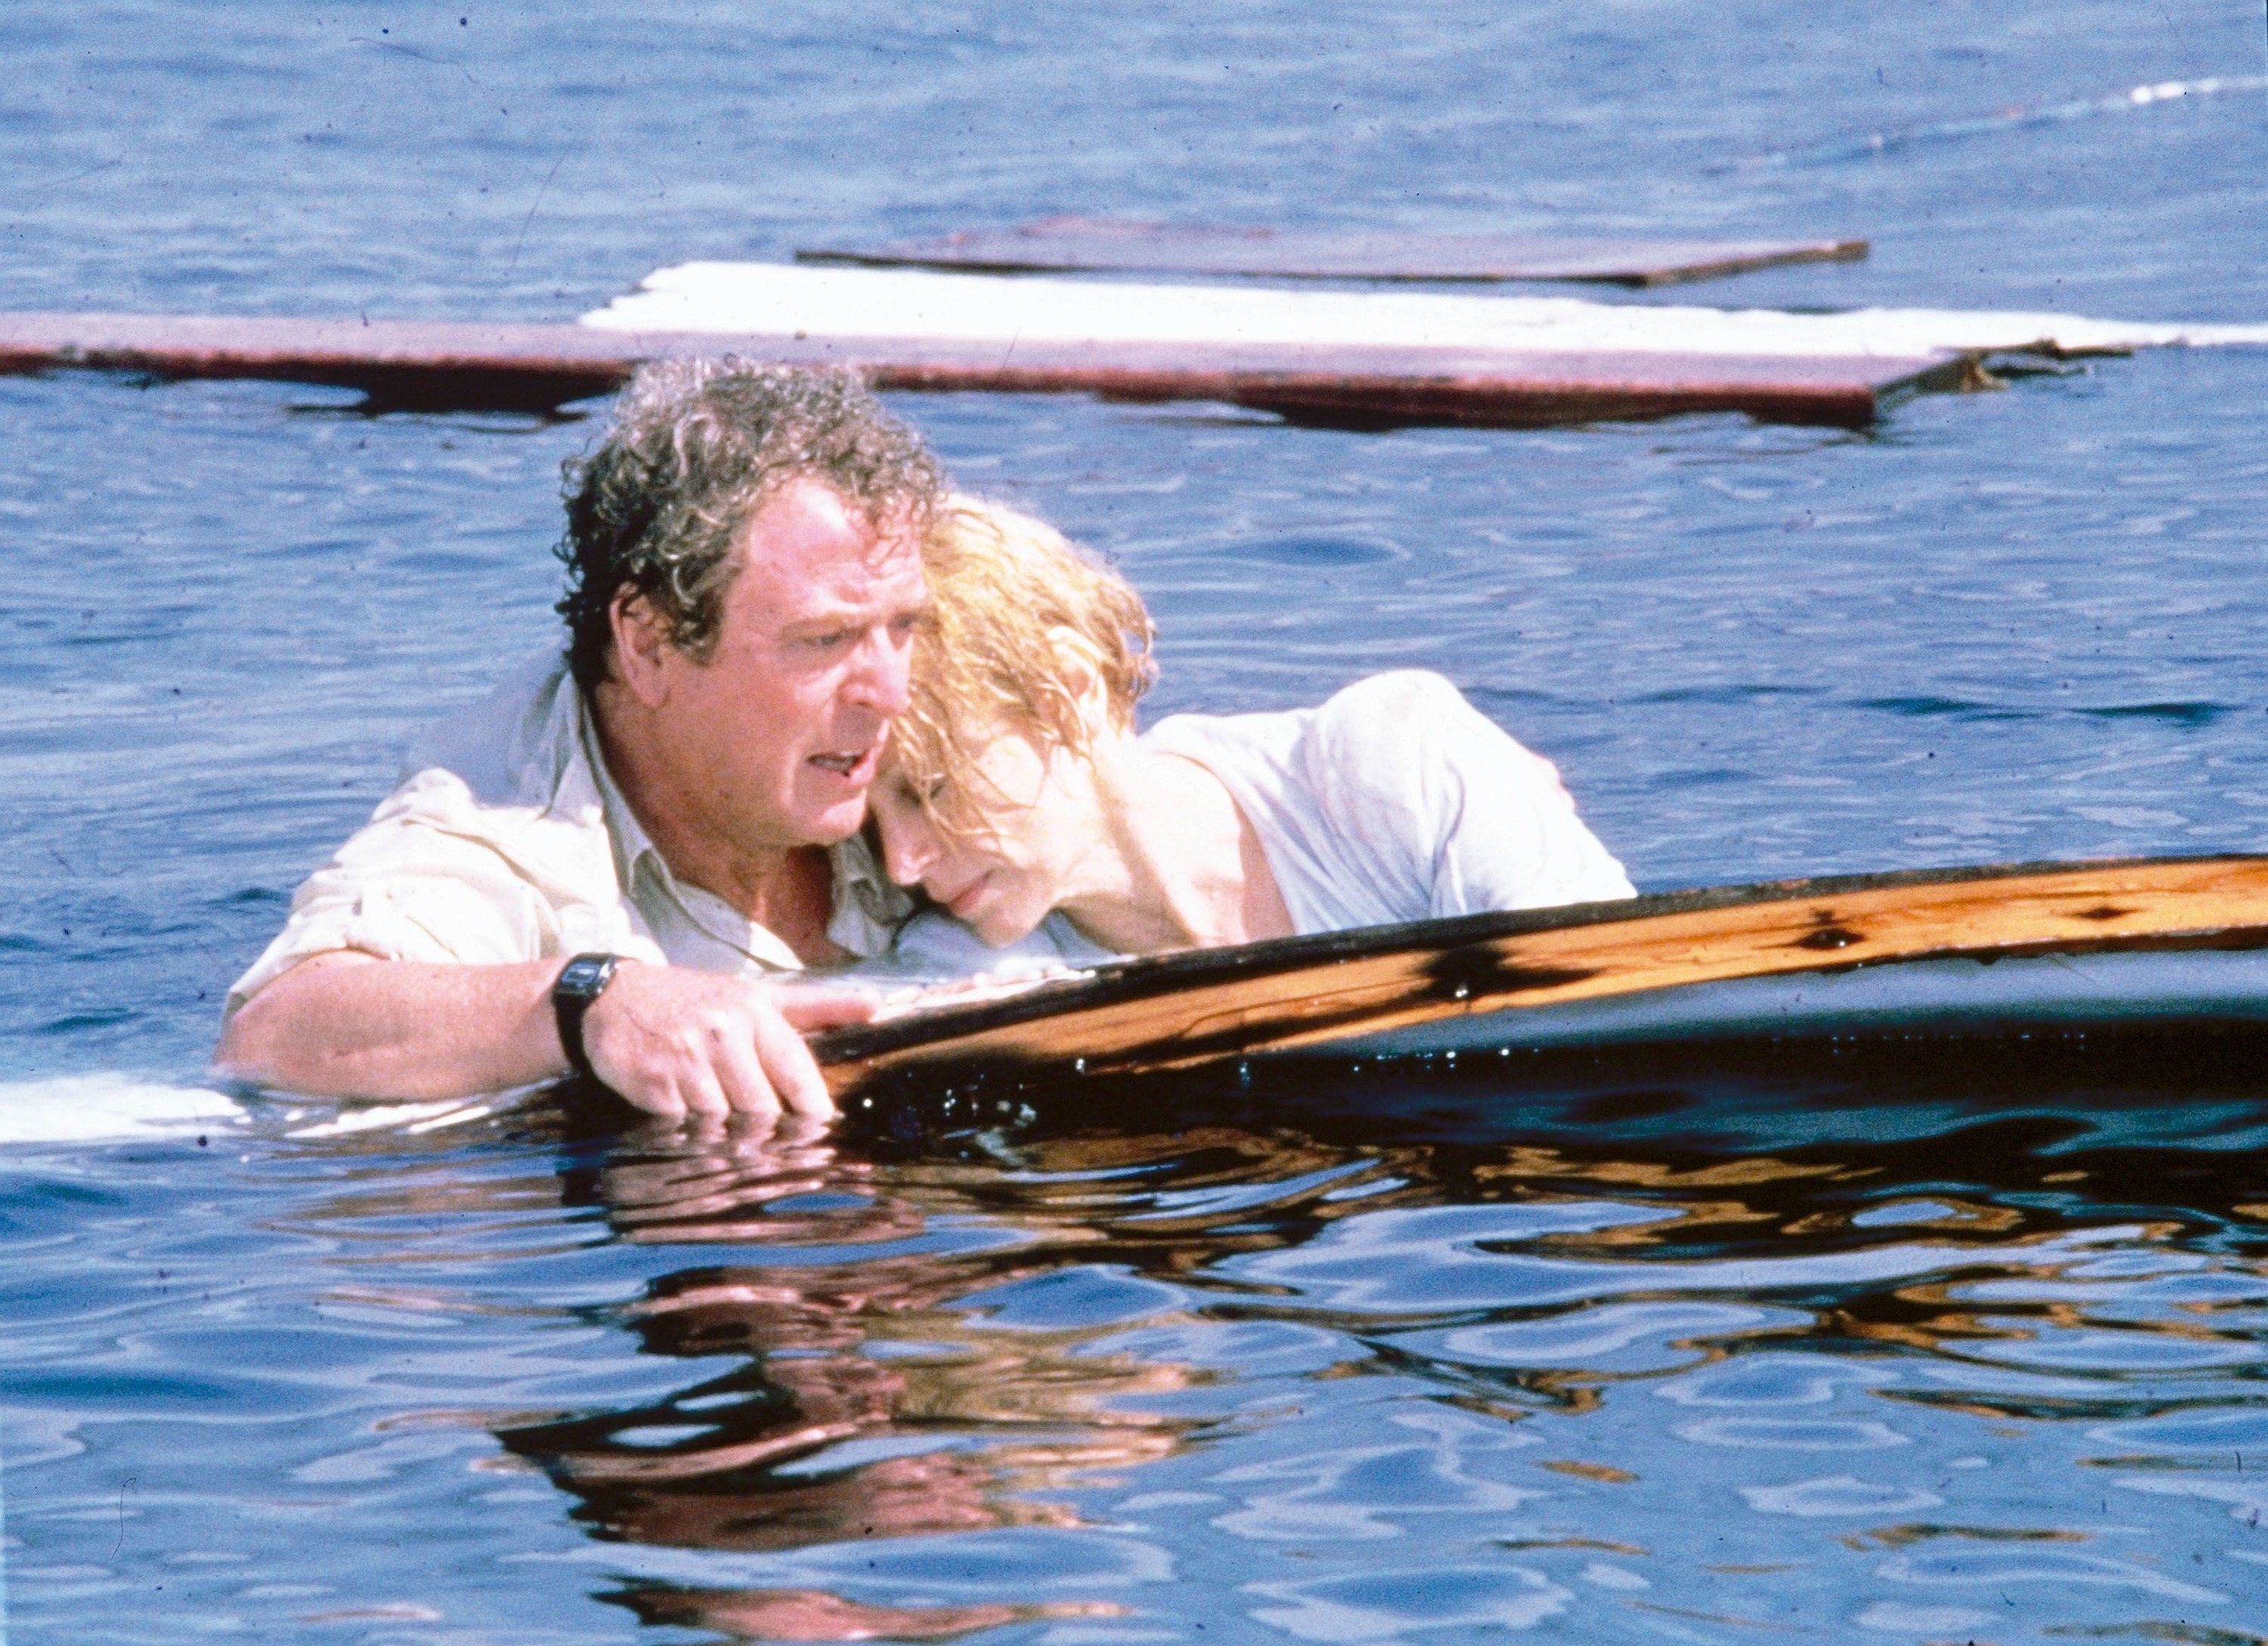 Michael Caine floats with a woman on boat wreckage in the Ocean